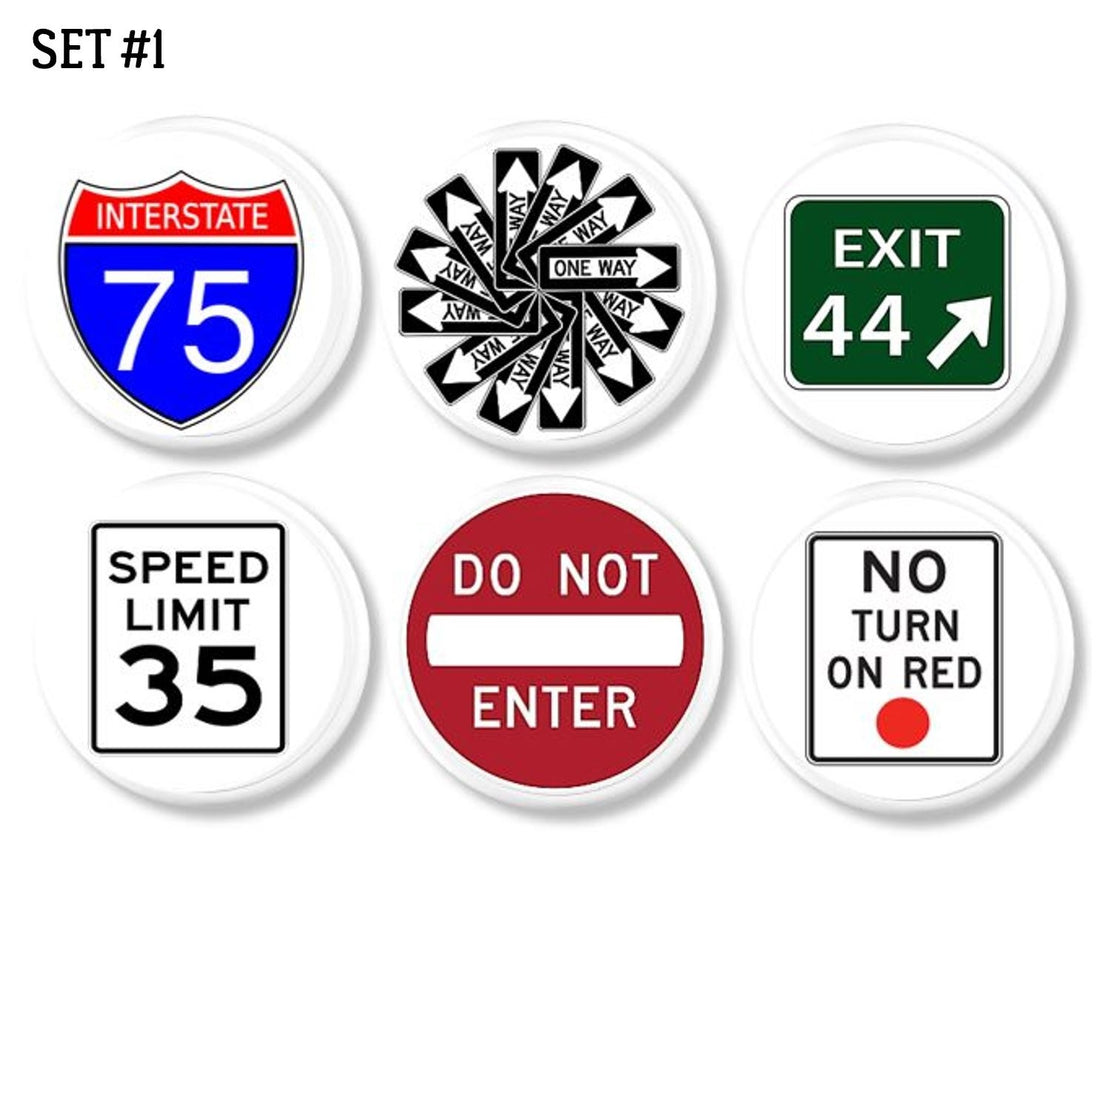 6 Traffic sign themed dresser drawer pulls. Handmade knobs with interstate and road signs for garage or boys room.